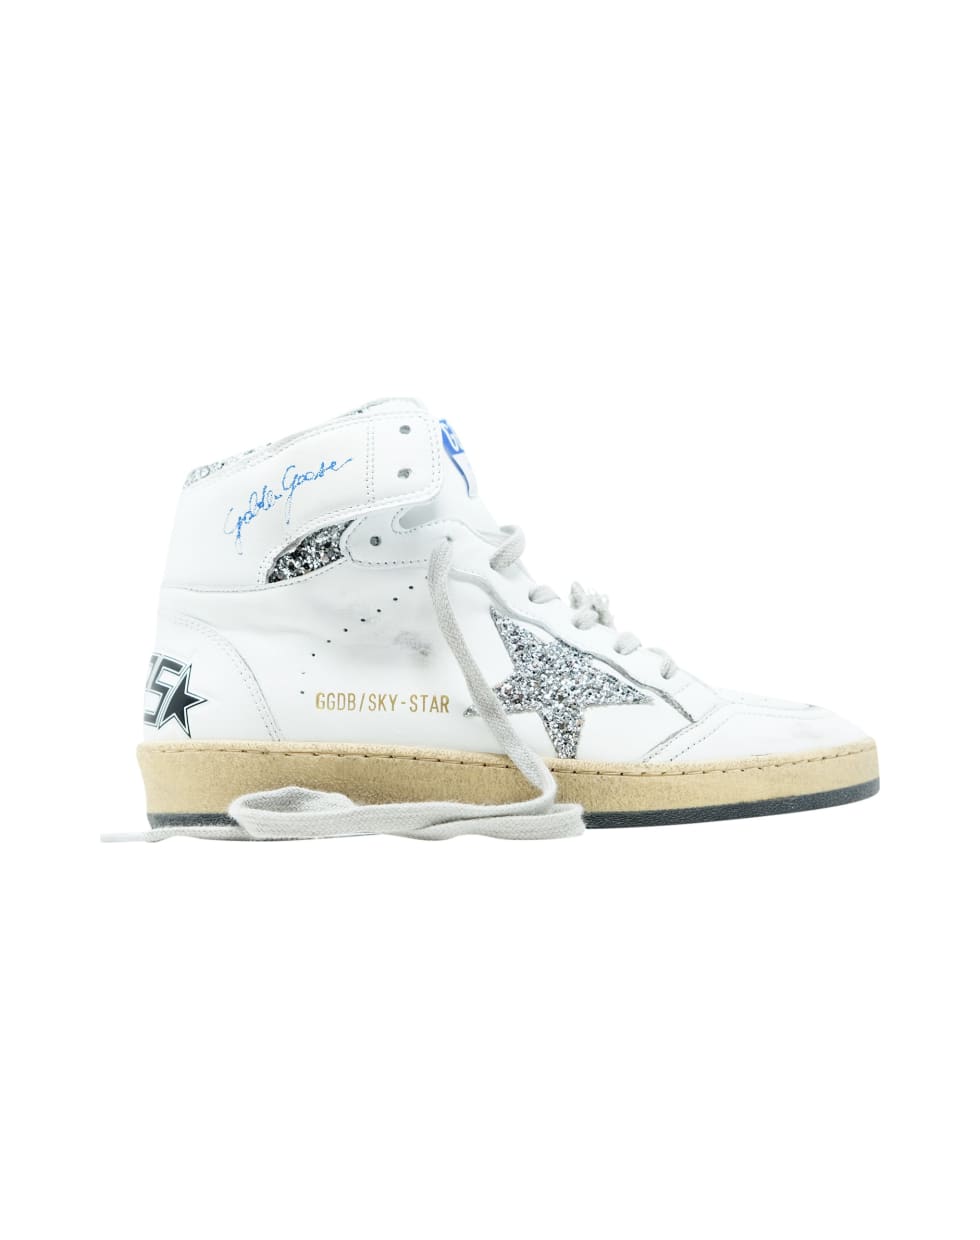 Golden Goose White Leather Sky Star Sneakers | italist